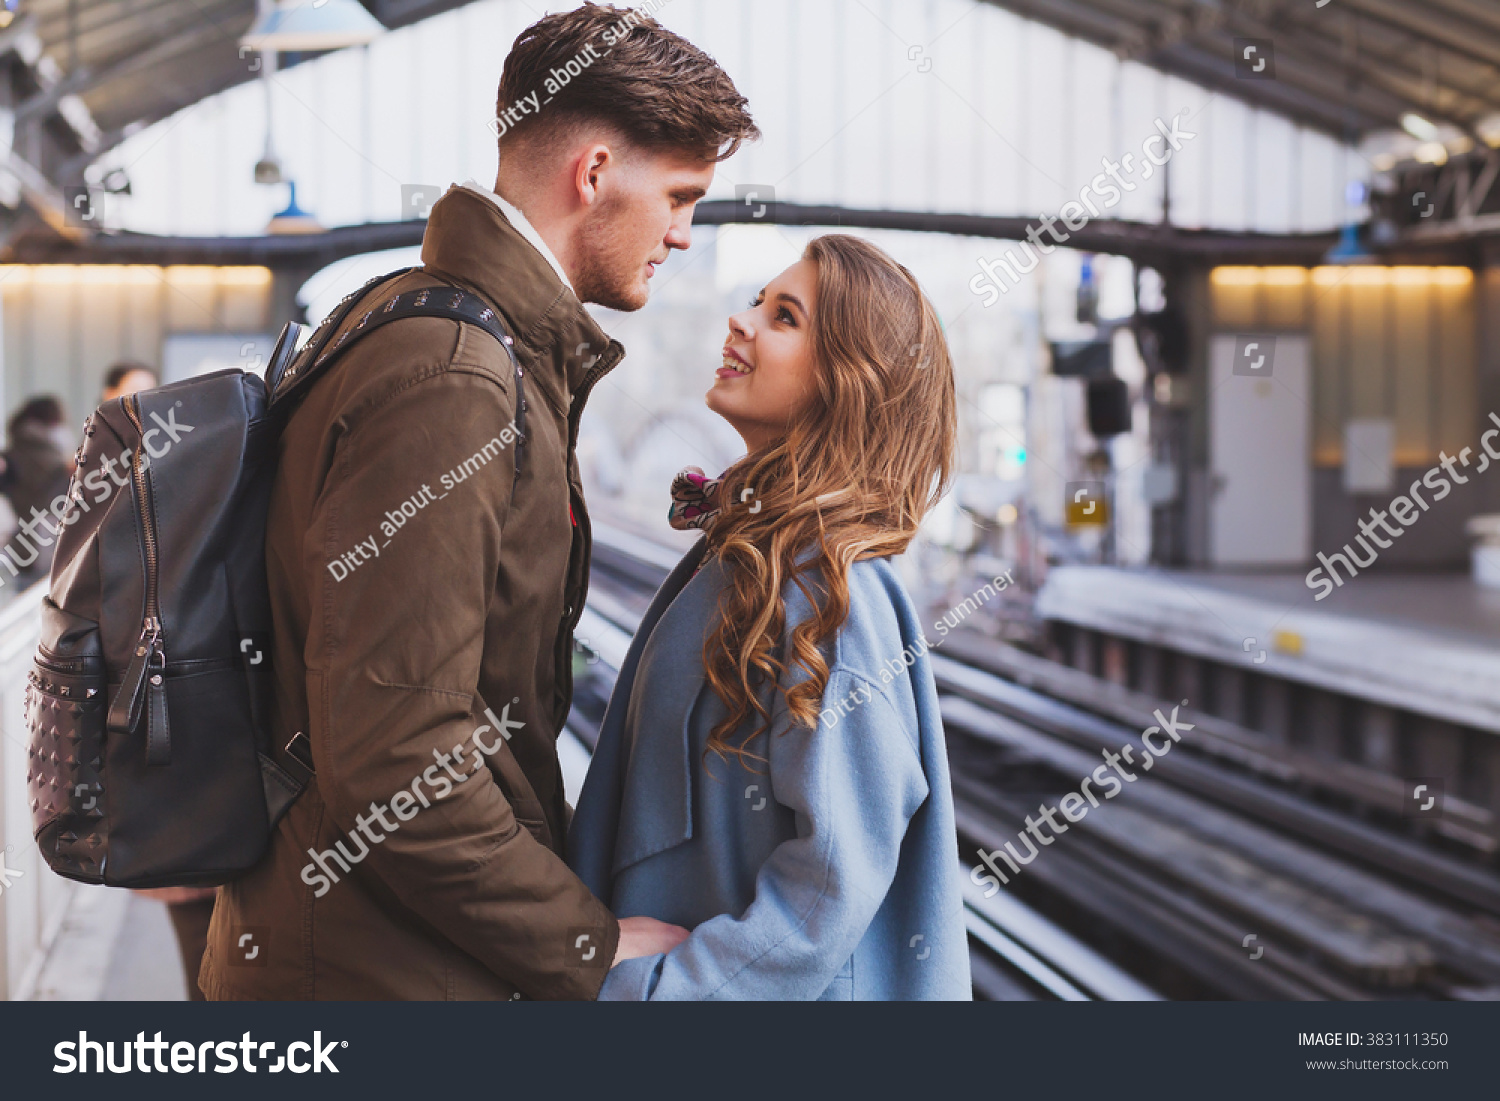 long distance relationship, couple on platform at the train station, meeting or parting concept #383111350